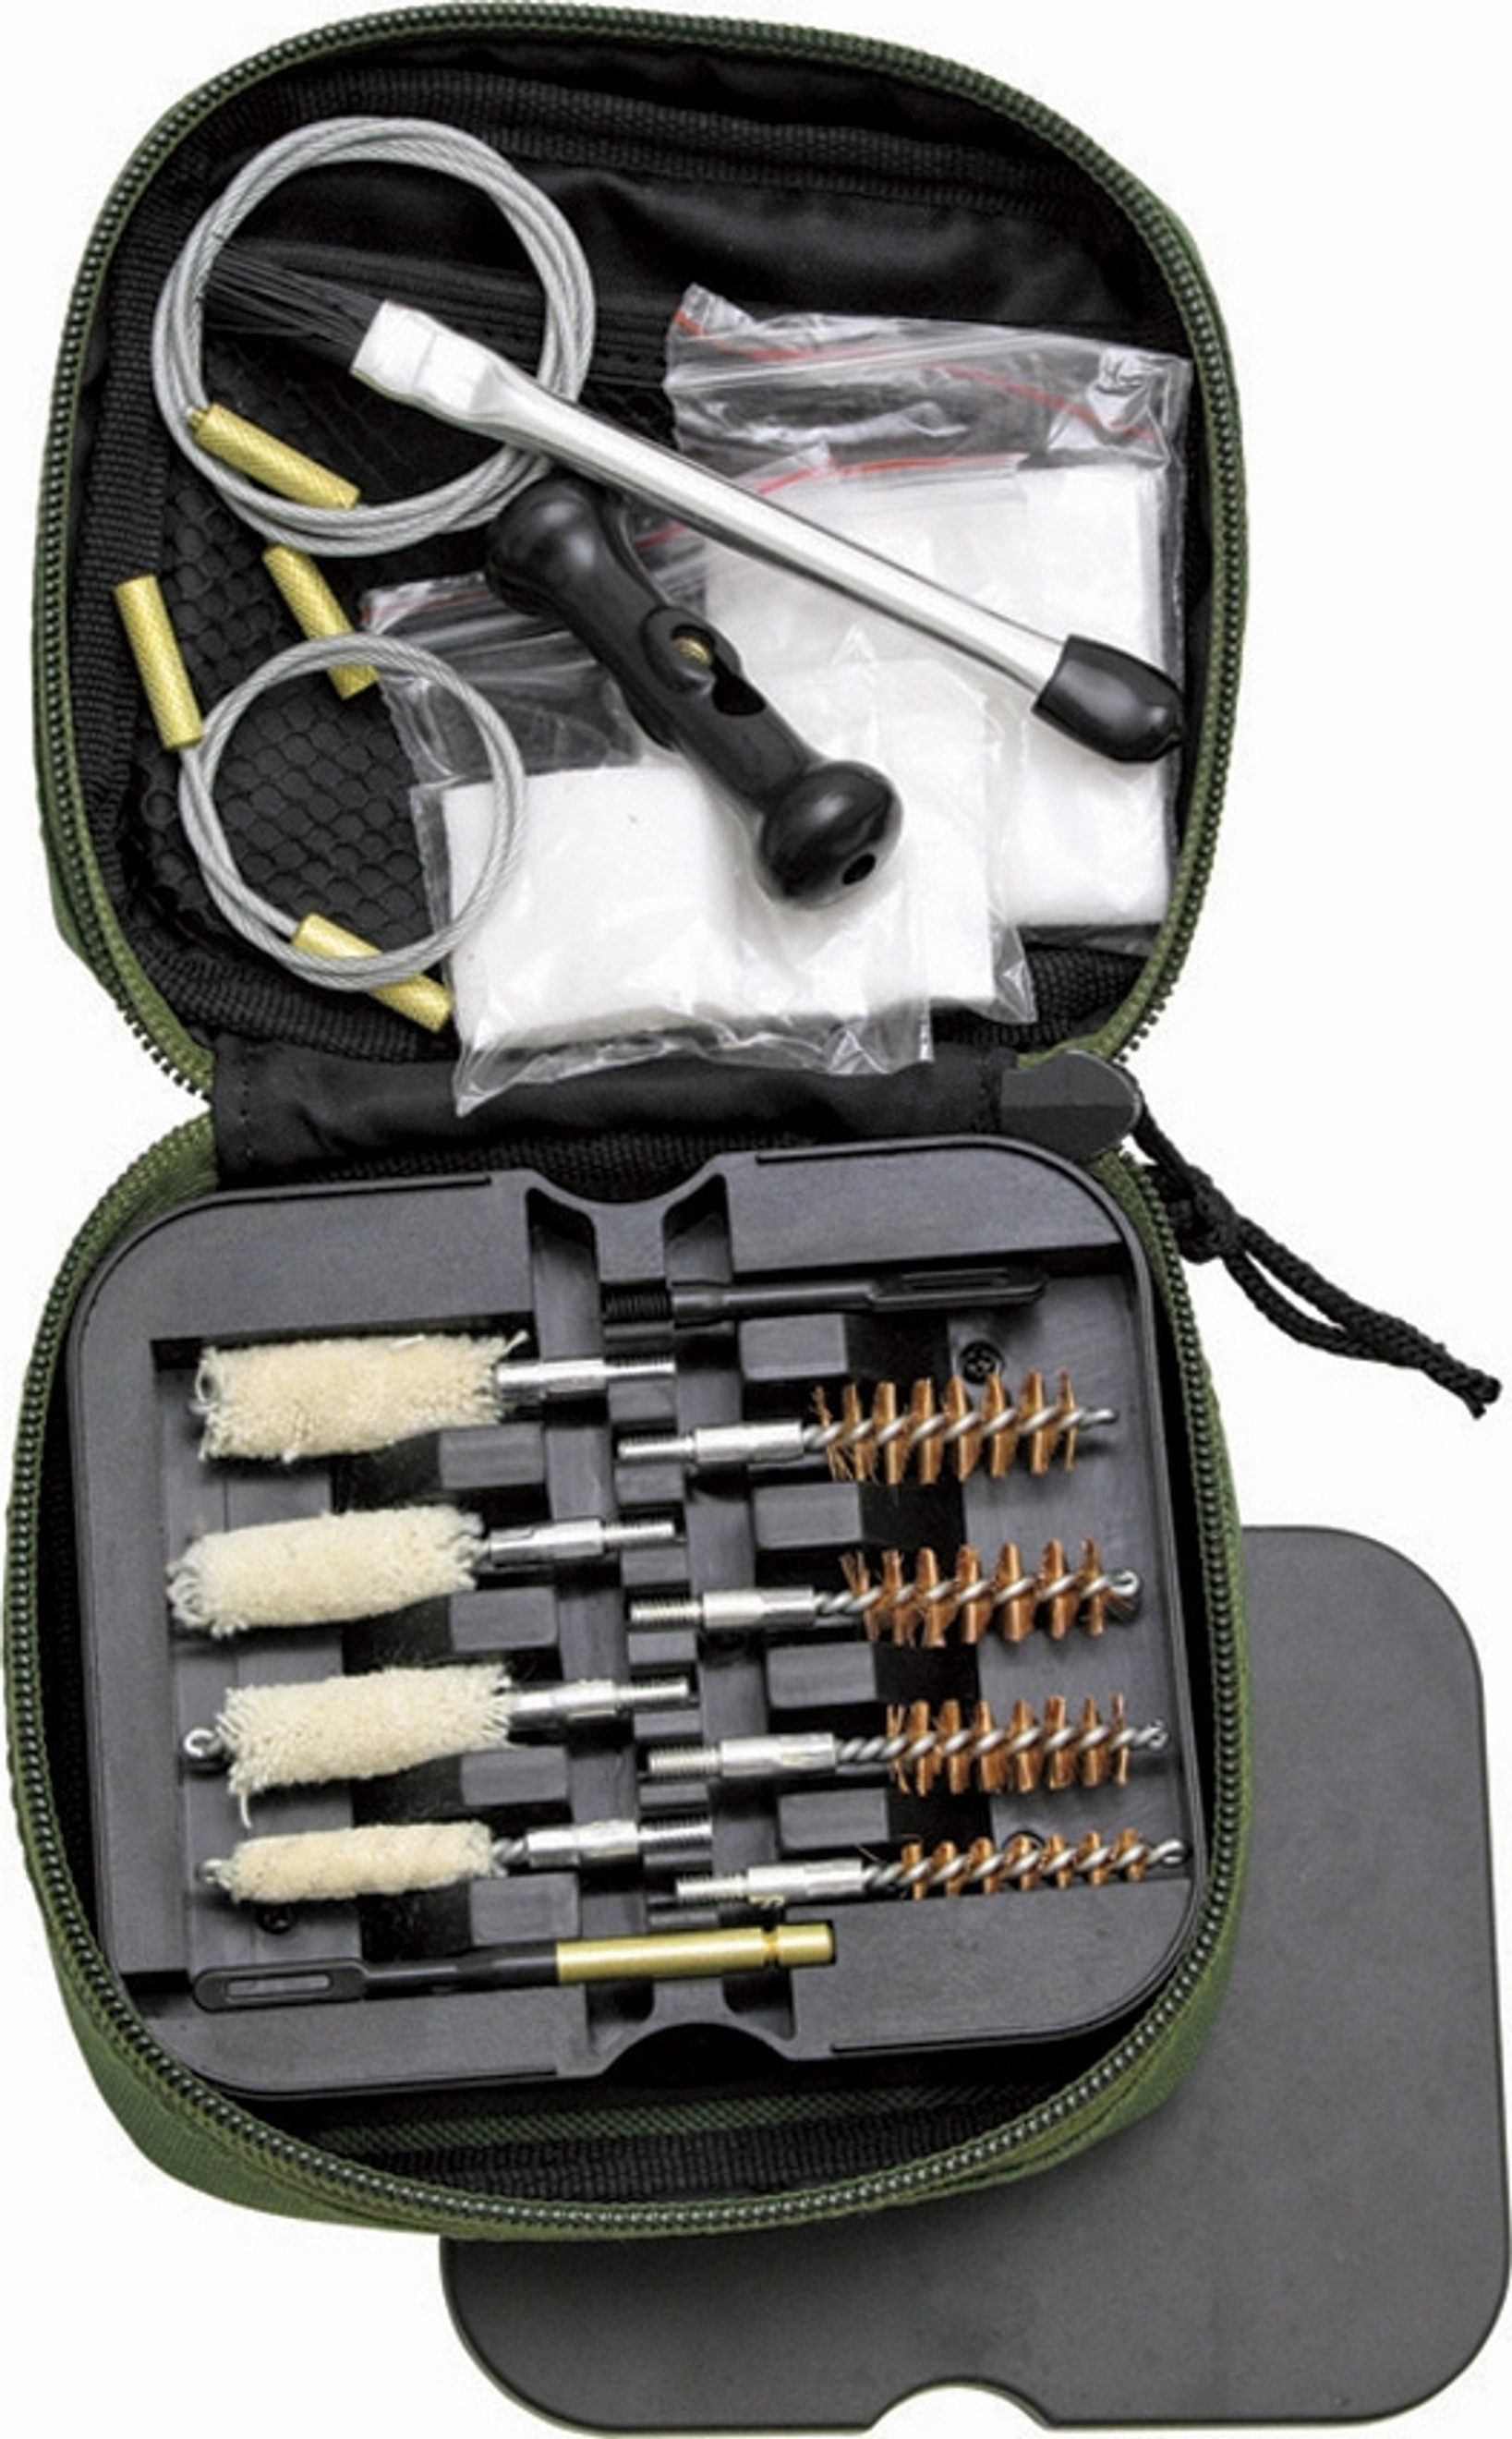 Portable Pistol Cleaning Kit AB0034